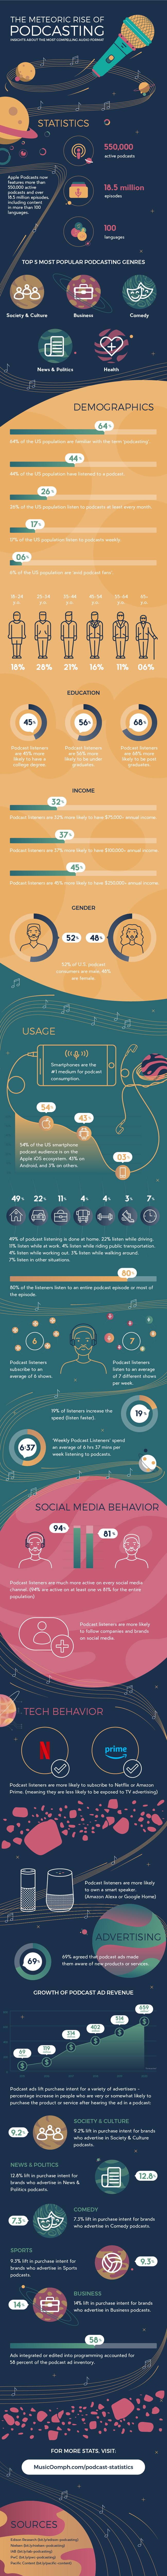 meteoric rise of podcasts